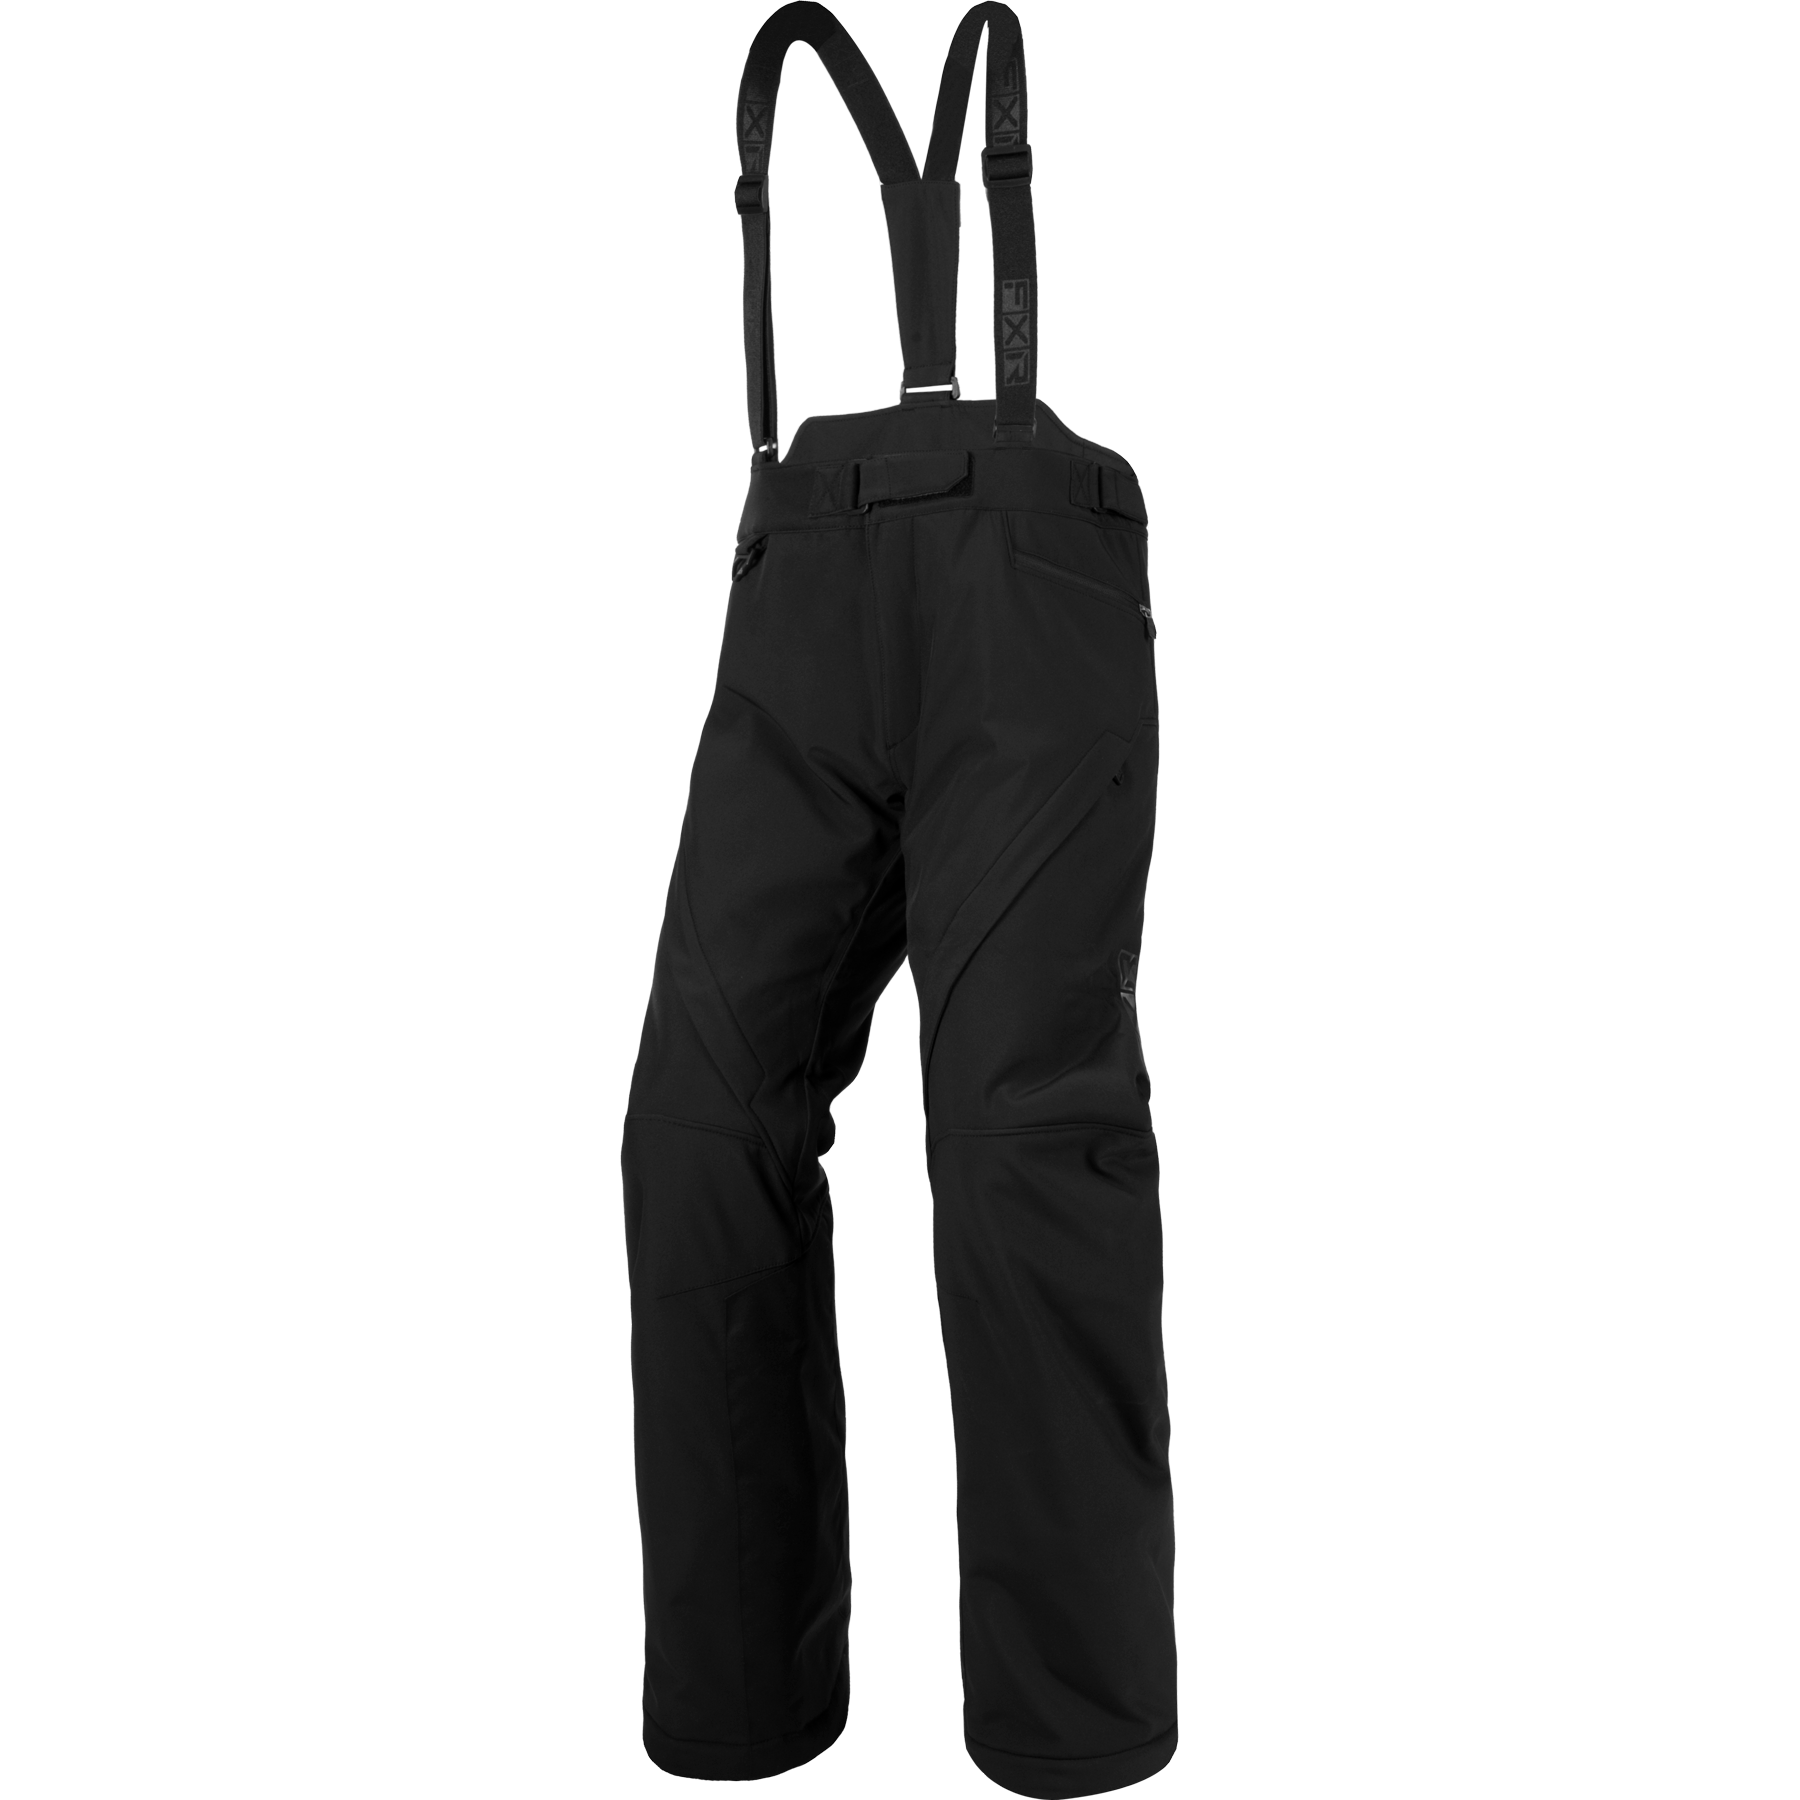 FXR Vertical Pro Insulated Softshell Pant